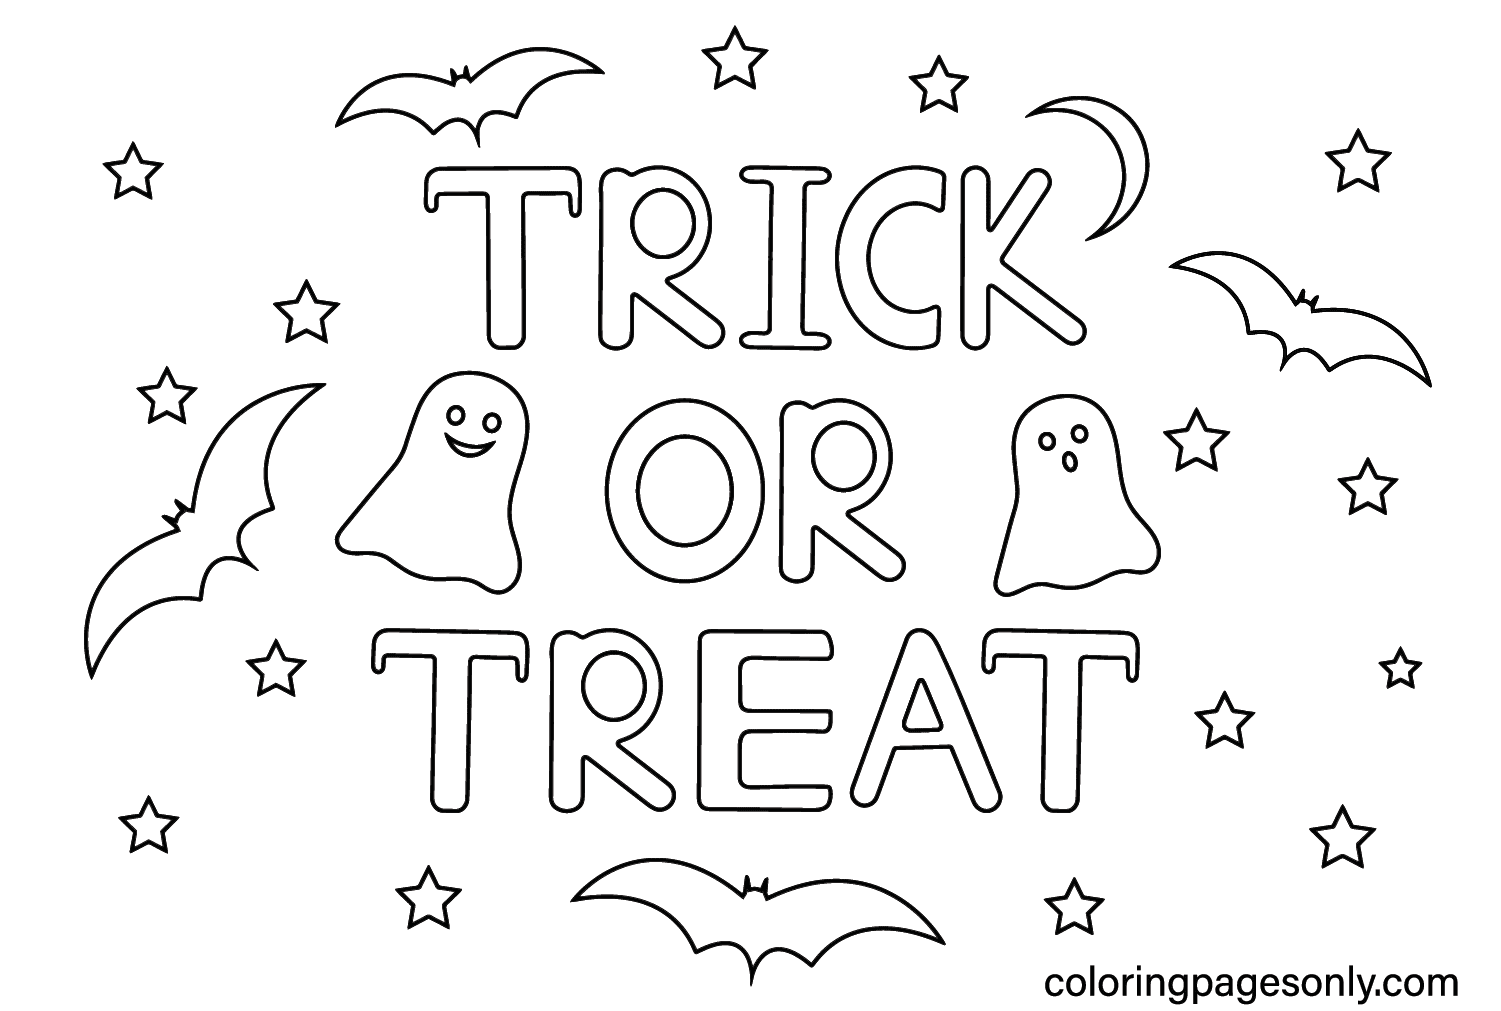 Trick or Treat Coloring Pages to Download - Free Printable Coloring Pages